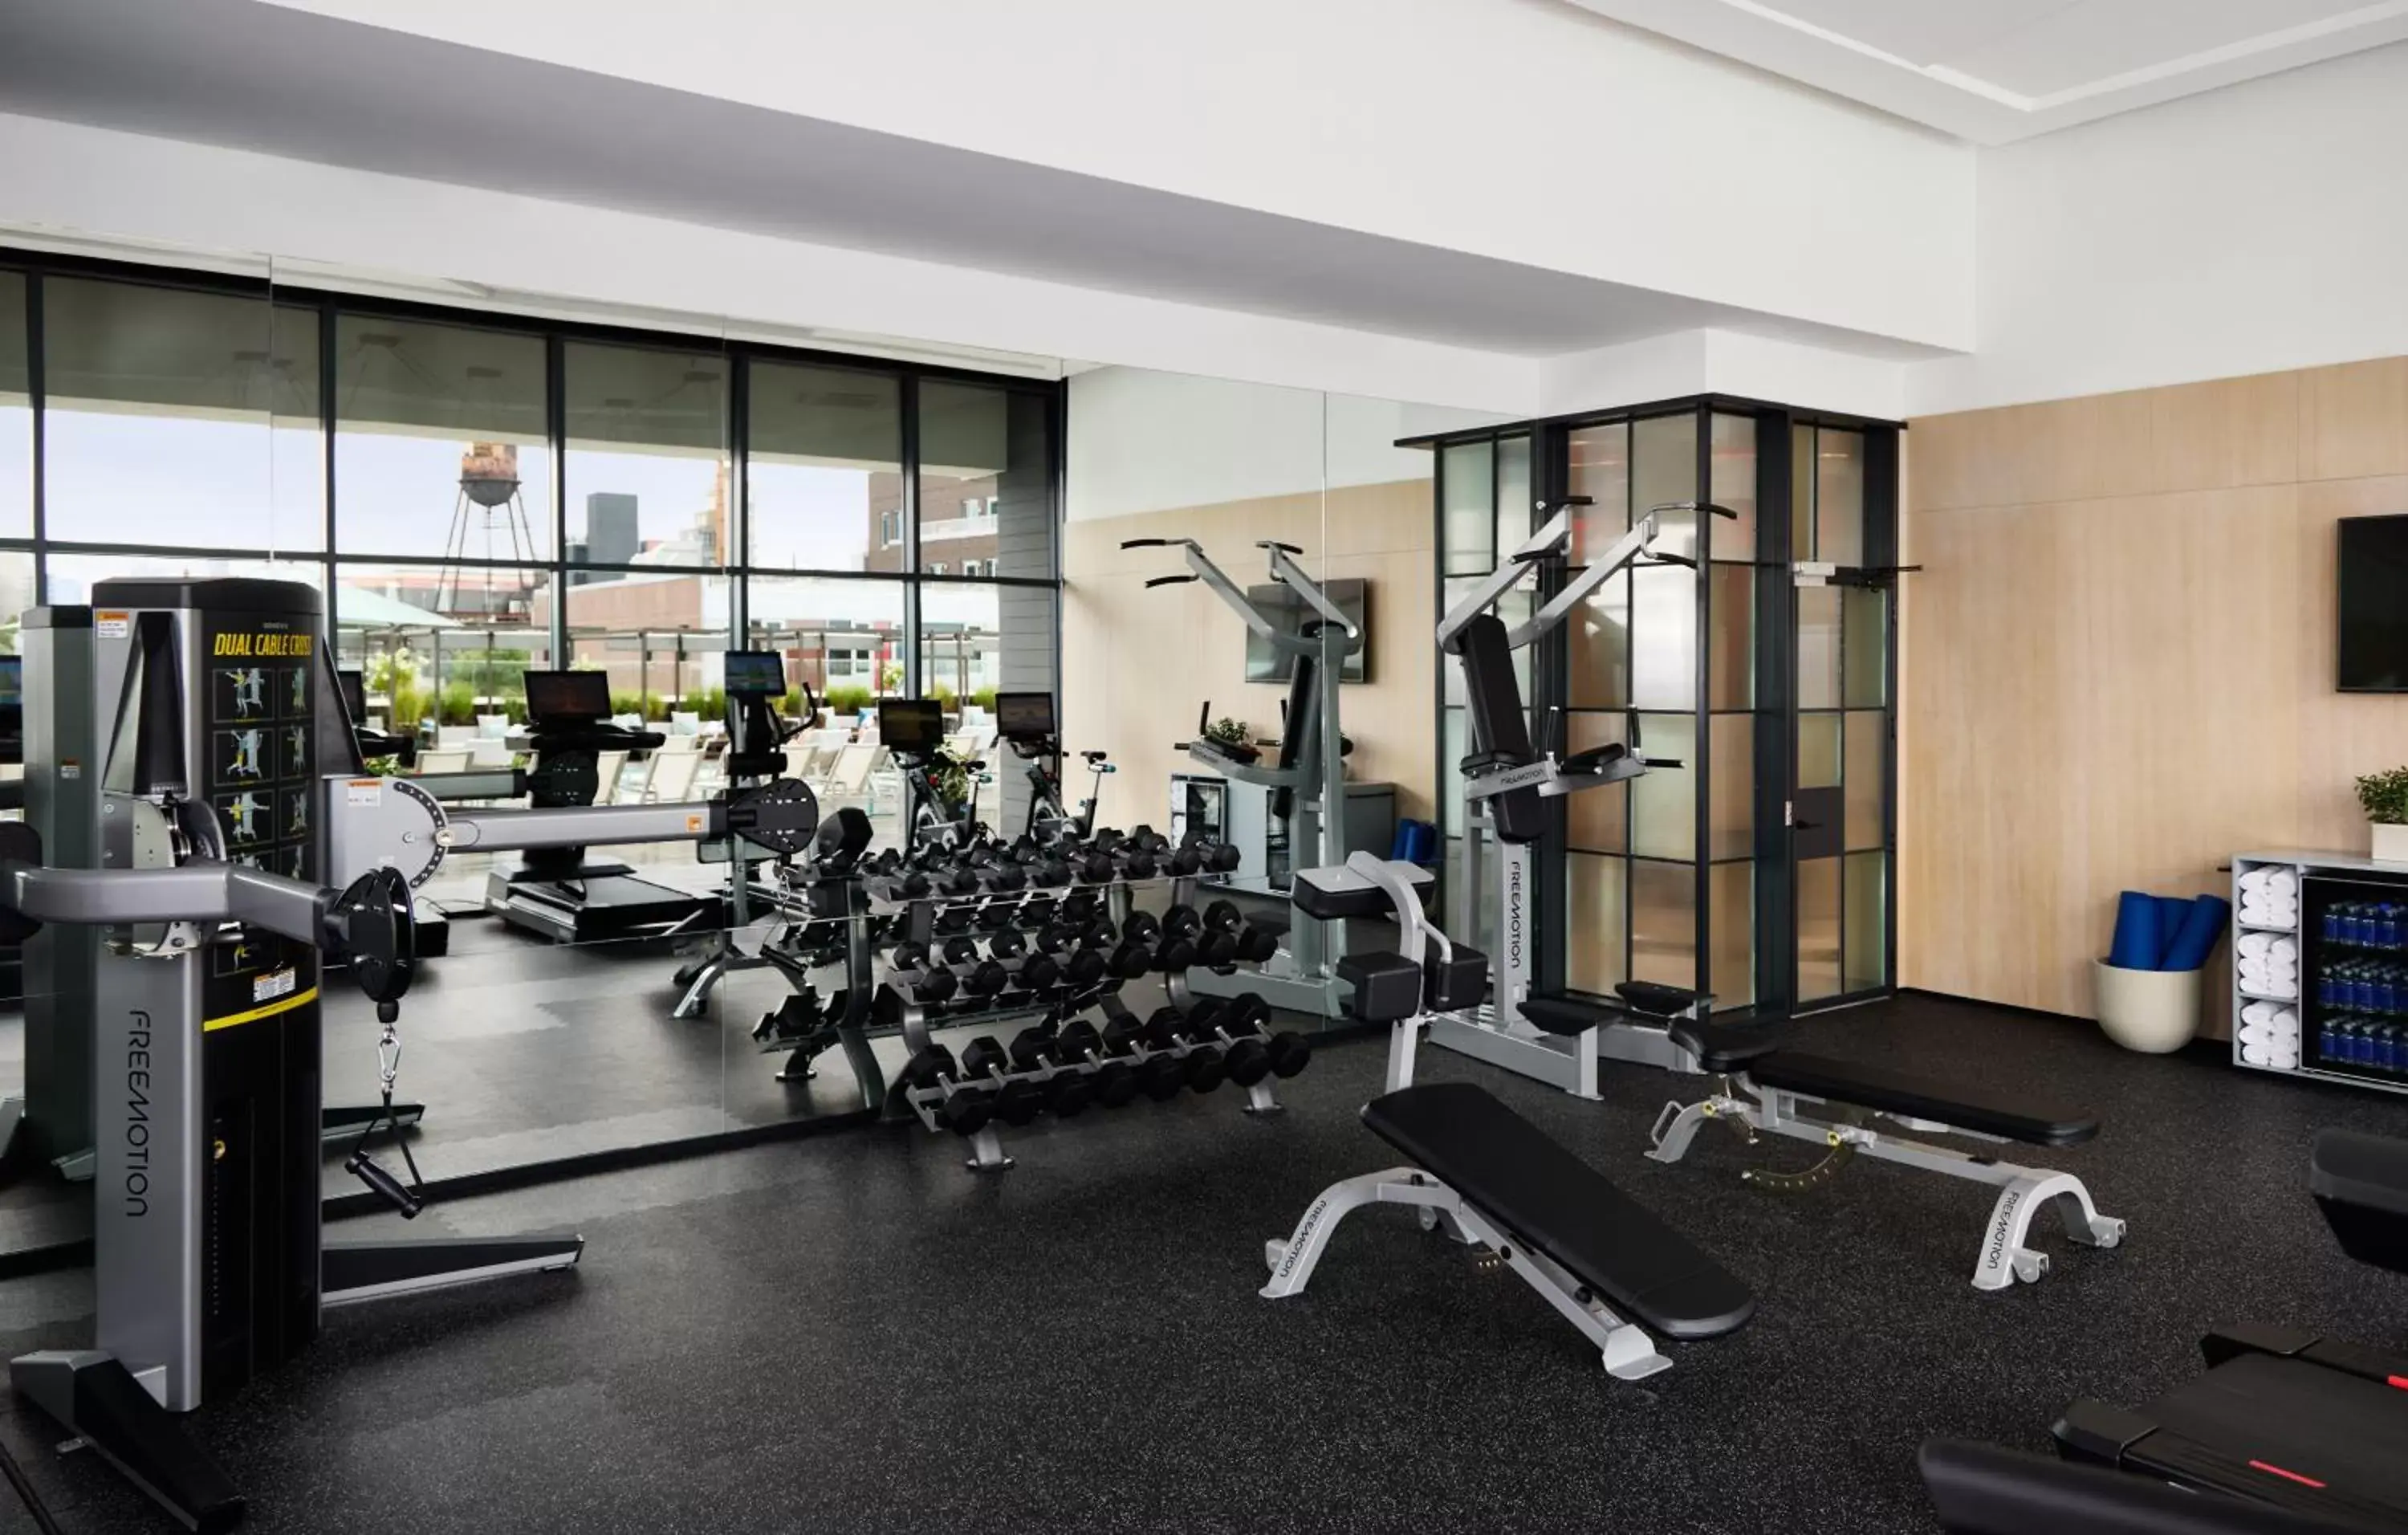 Fitness centre/facilities, Fitness Center/Facilities in The William Vale